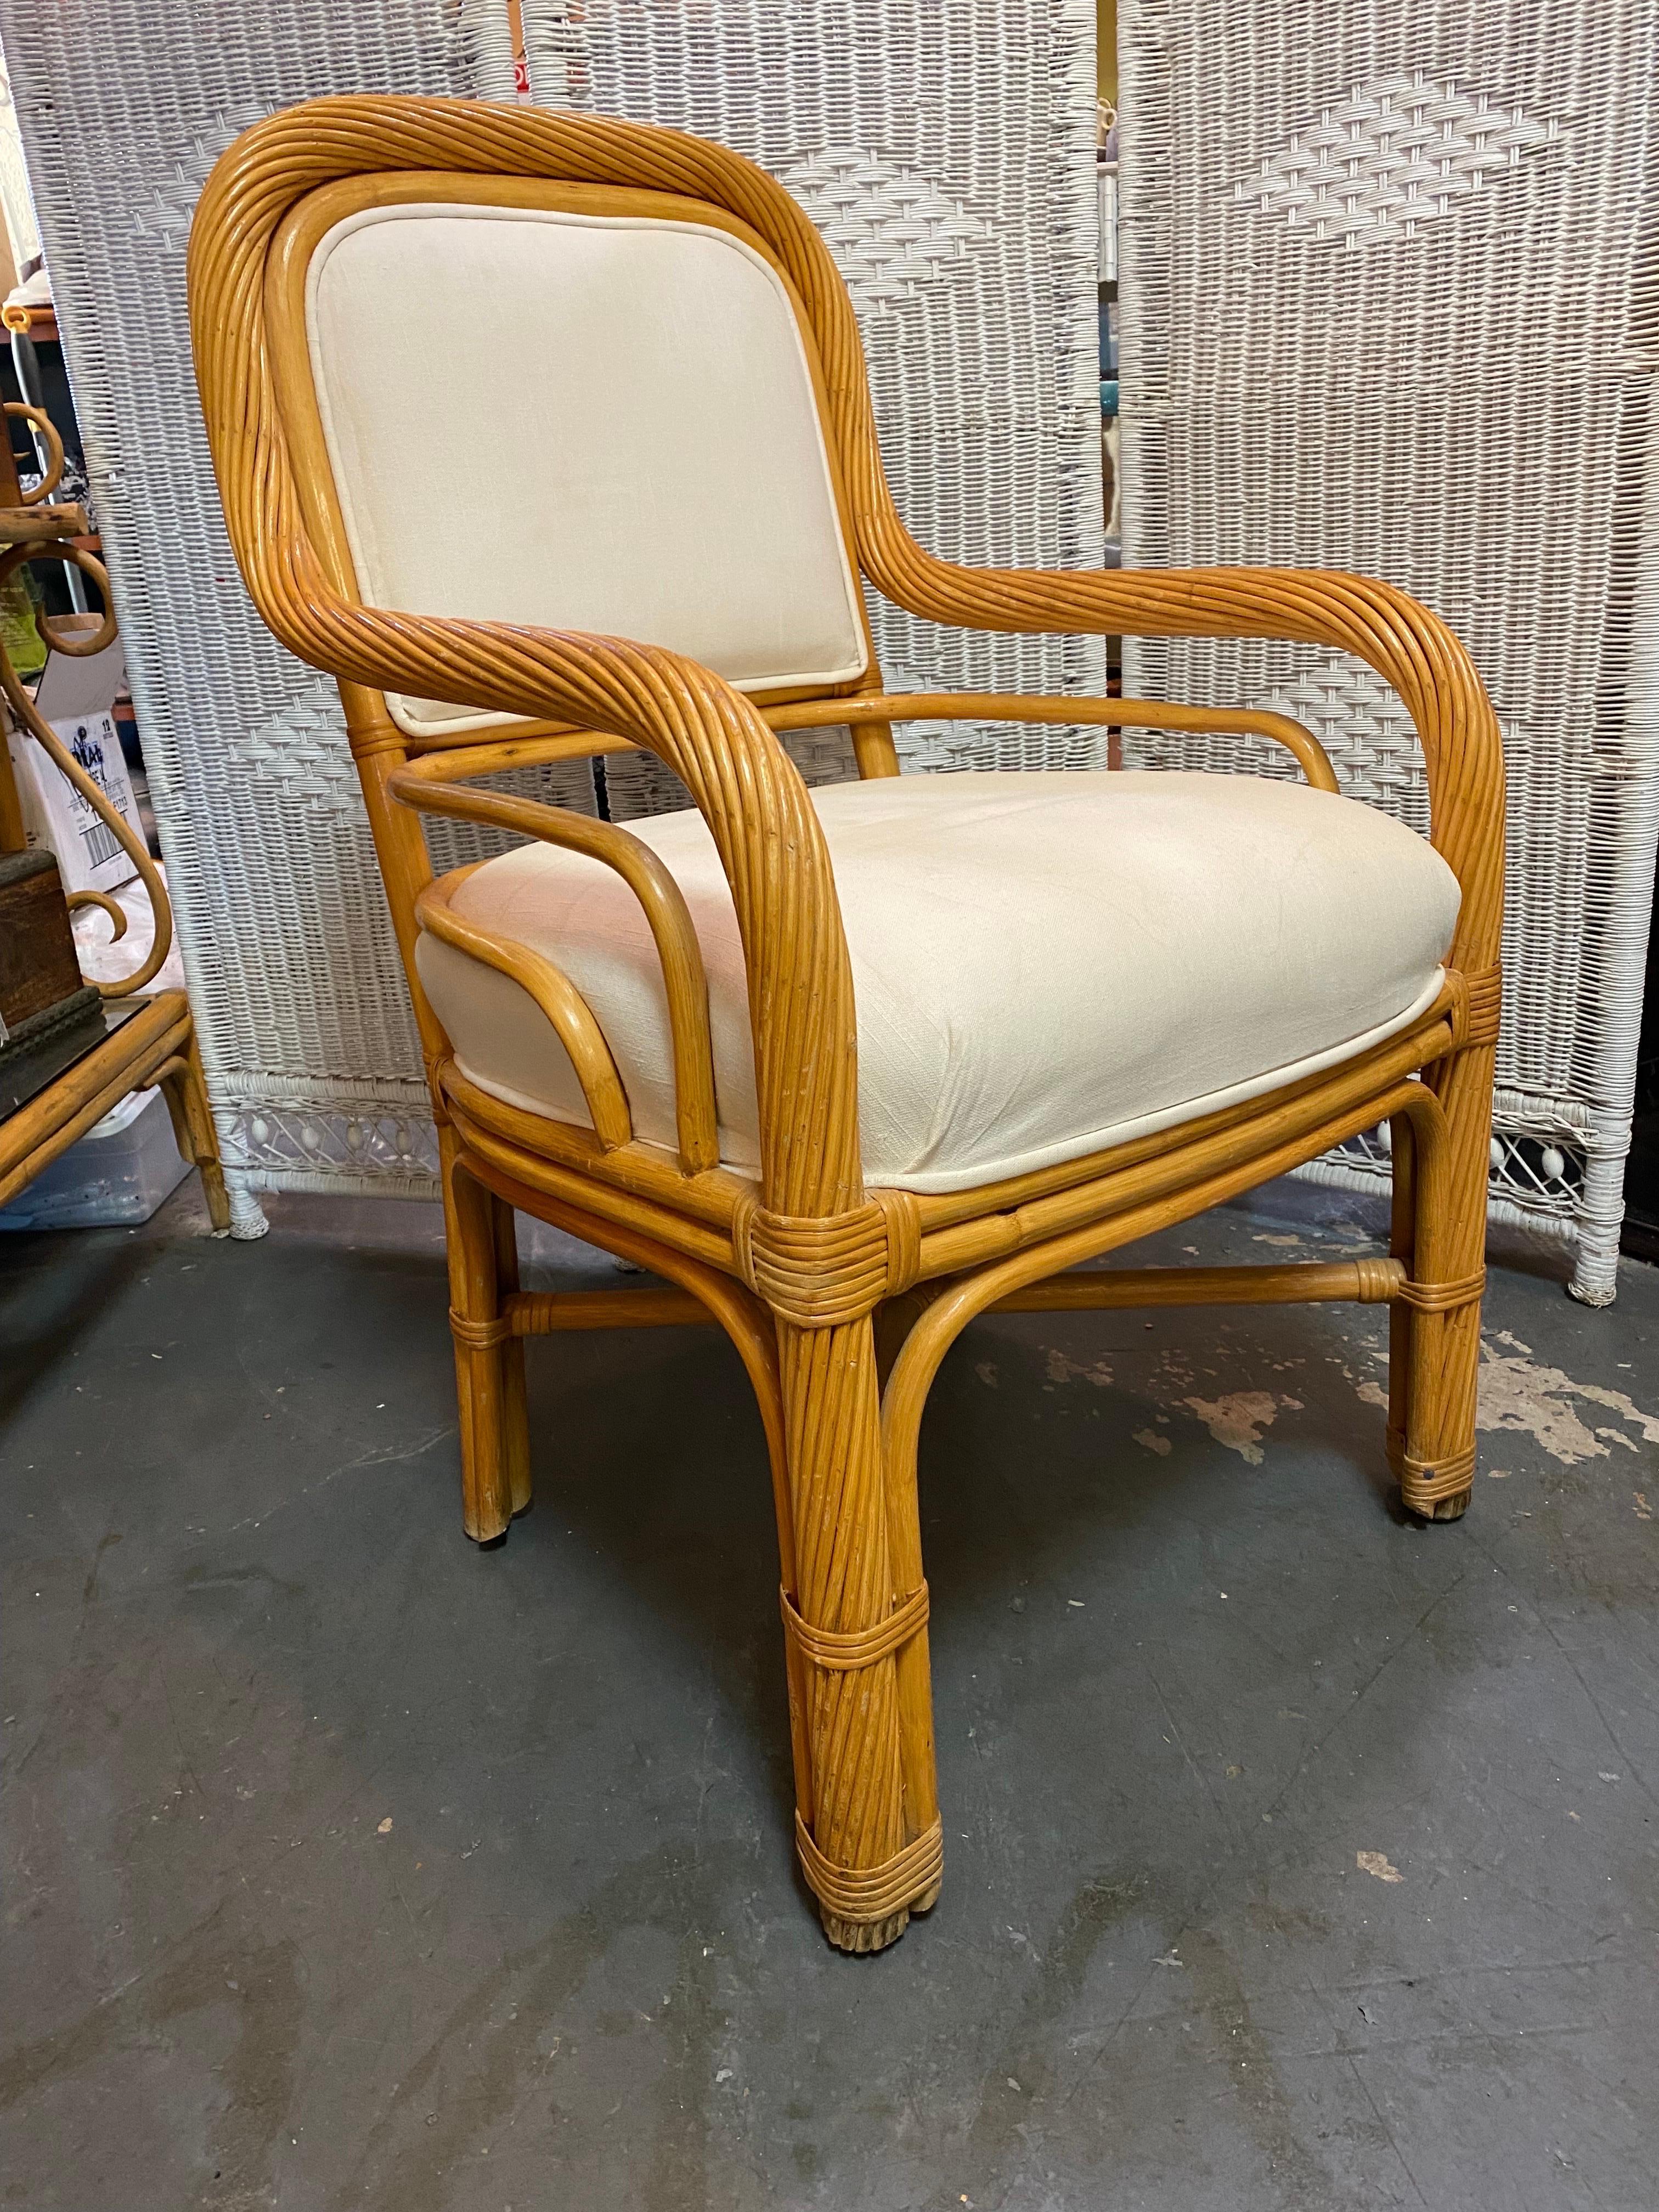 Beautiful vintage mid century style rattan and bamboo side chair with white upholstery. This is an excellent boho chic piece of furniture that will work well as a side chair in your house or as an outside patio chair.

This Chair is in excellent